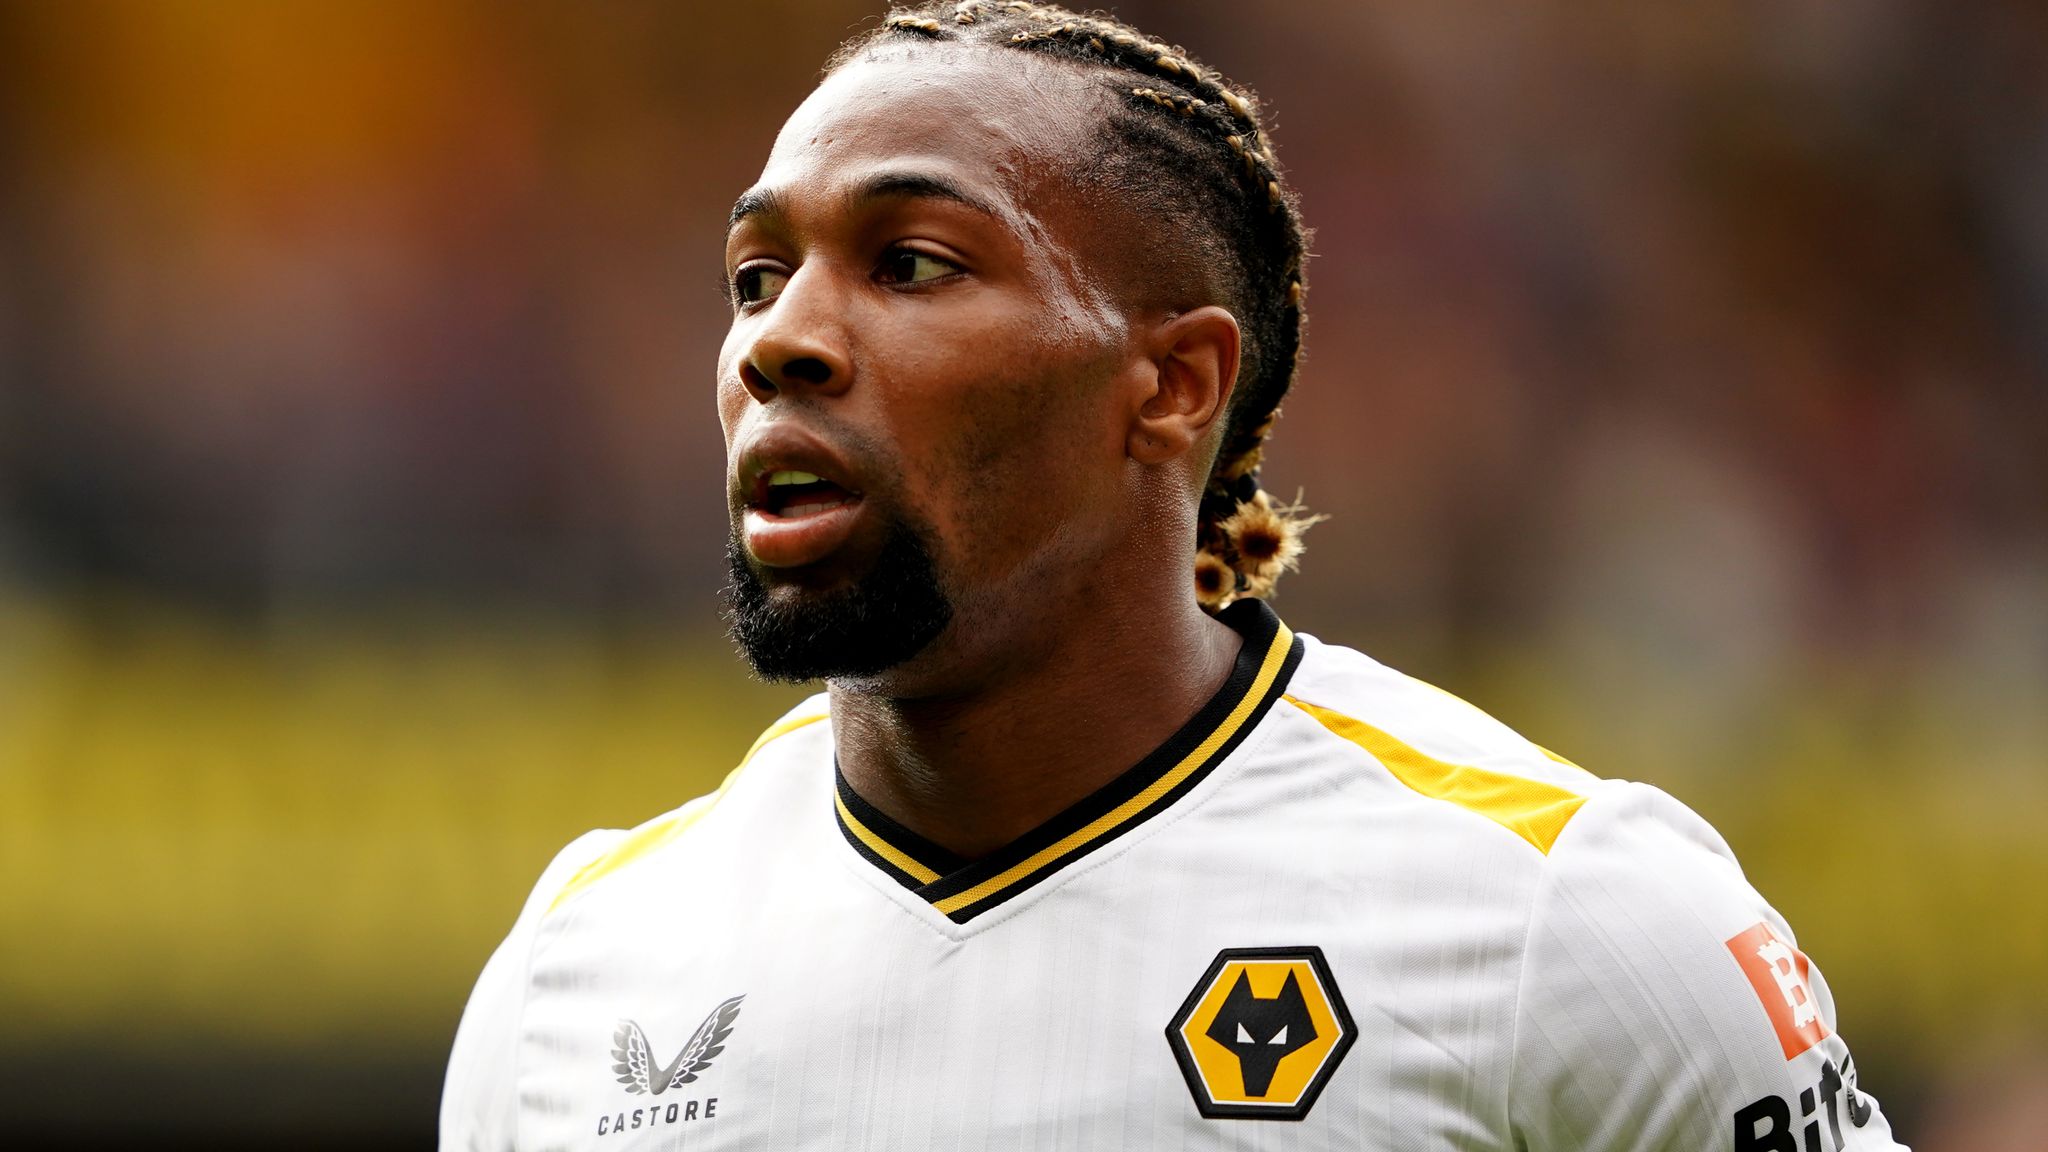 Adama Traore Barcelona Re Sign Forward From Wolves On Loan Until End Of Season With Option To